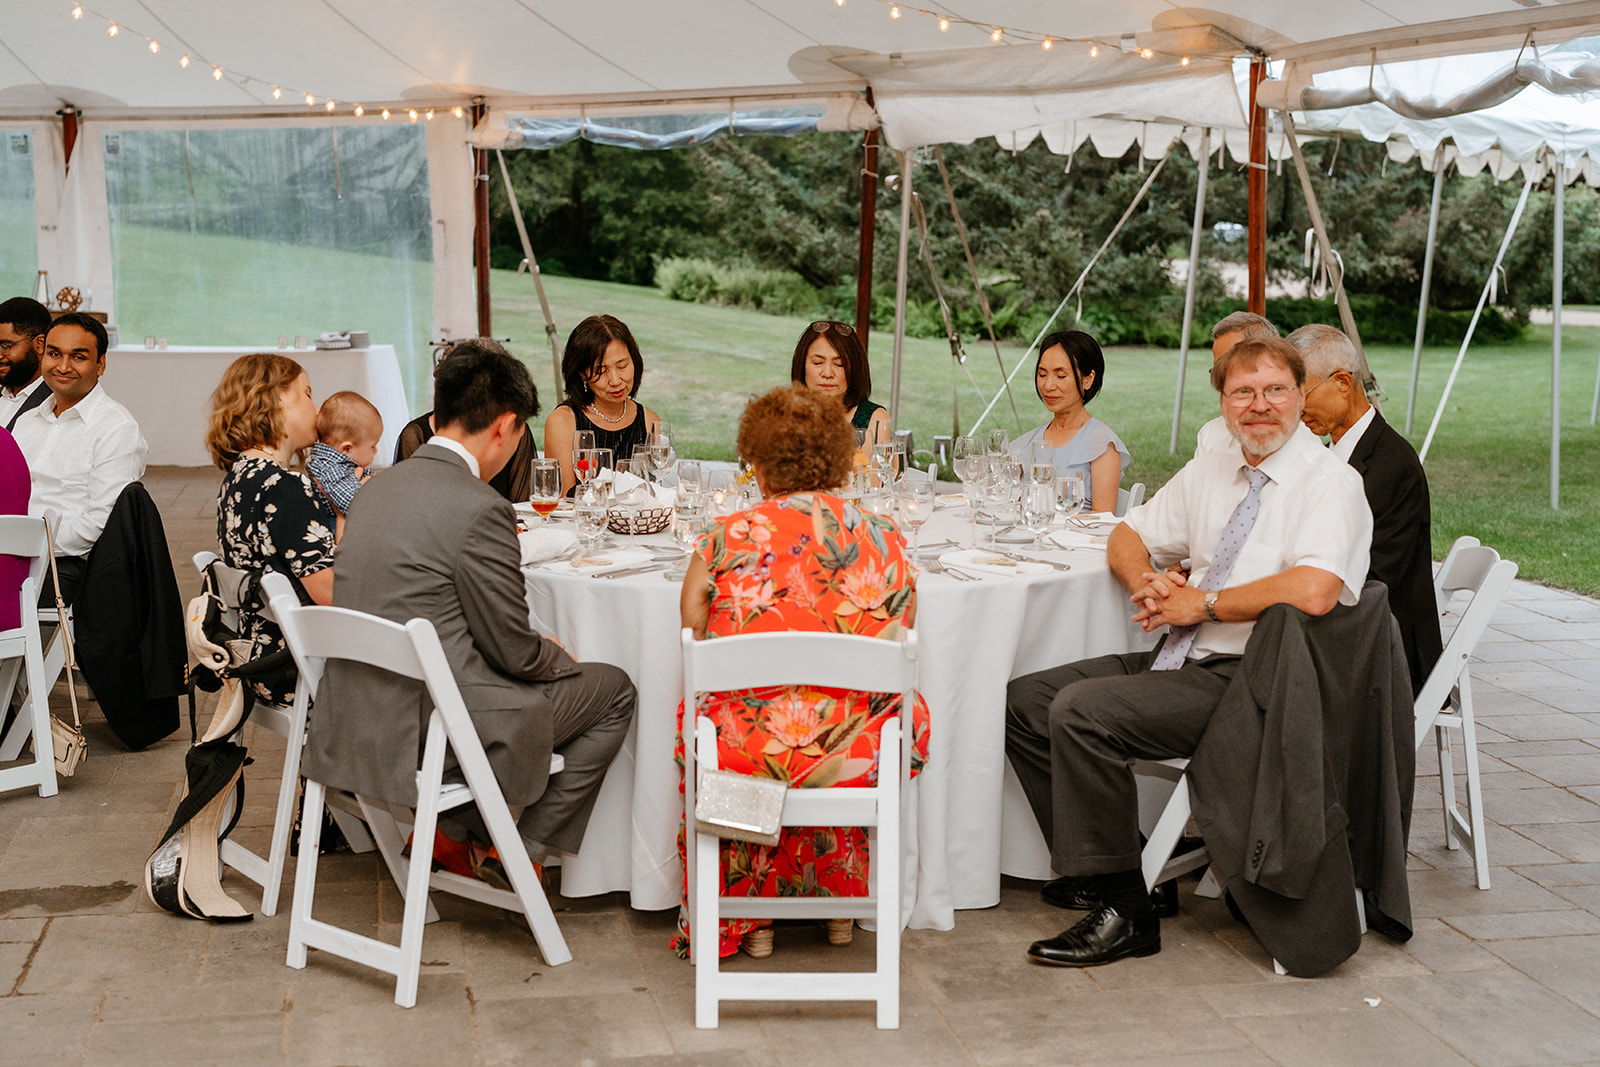 Guests seated at tables during an outdoor tented event, with one man looking towards the camera.